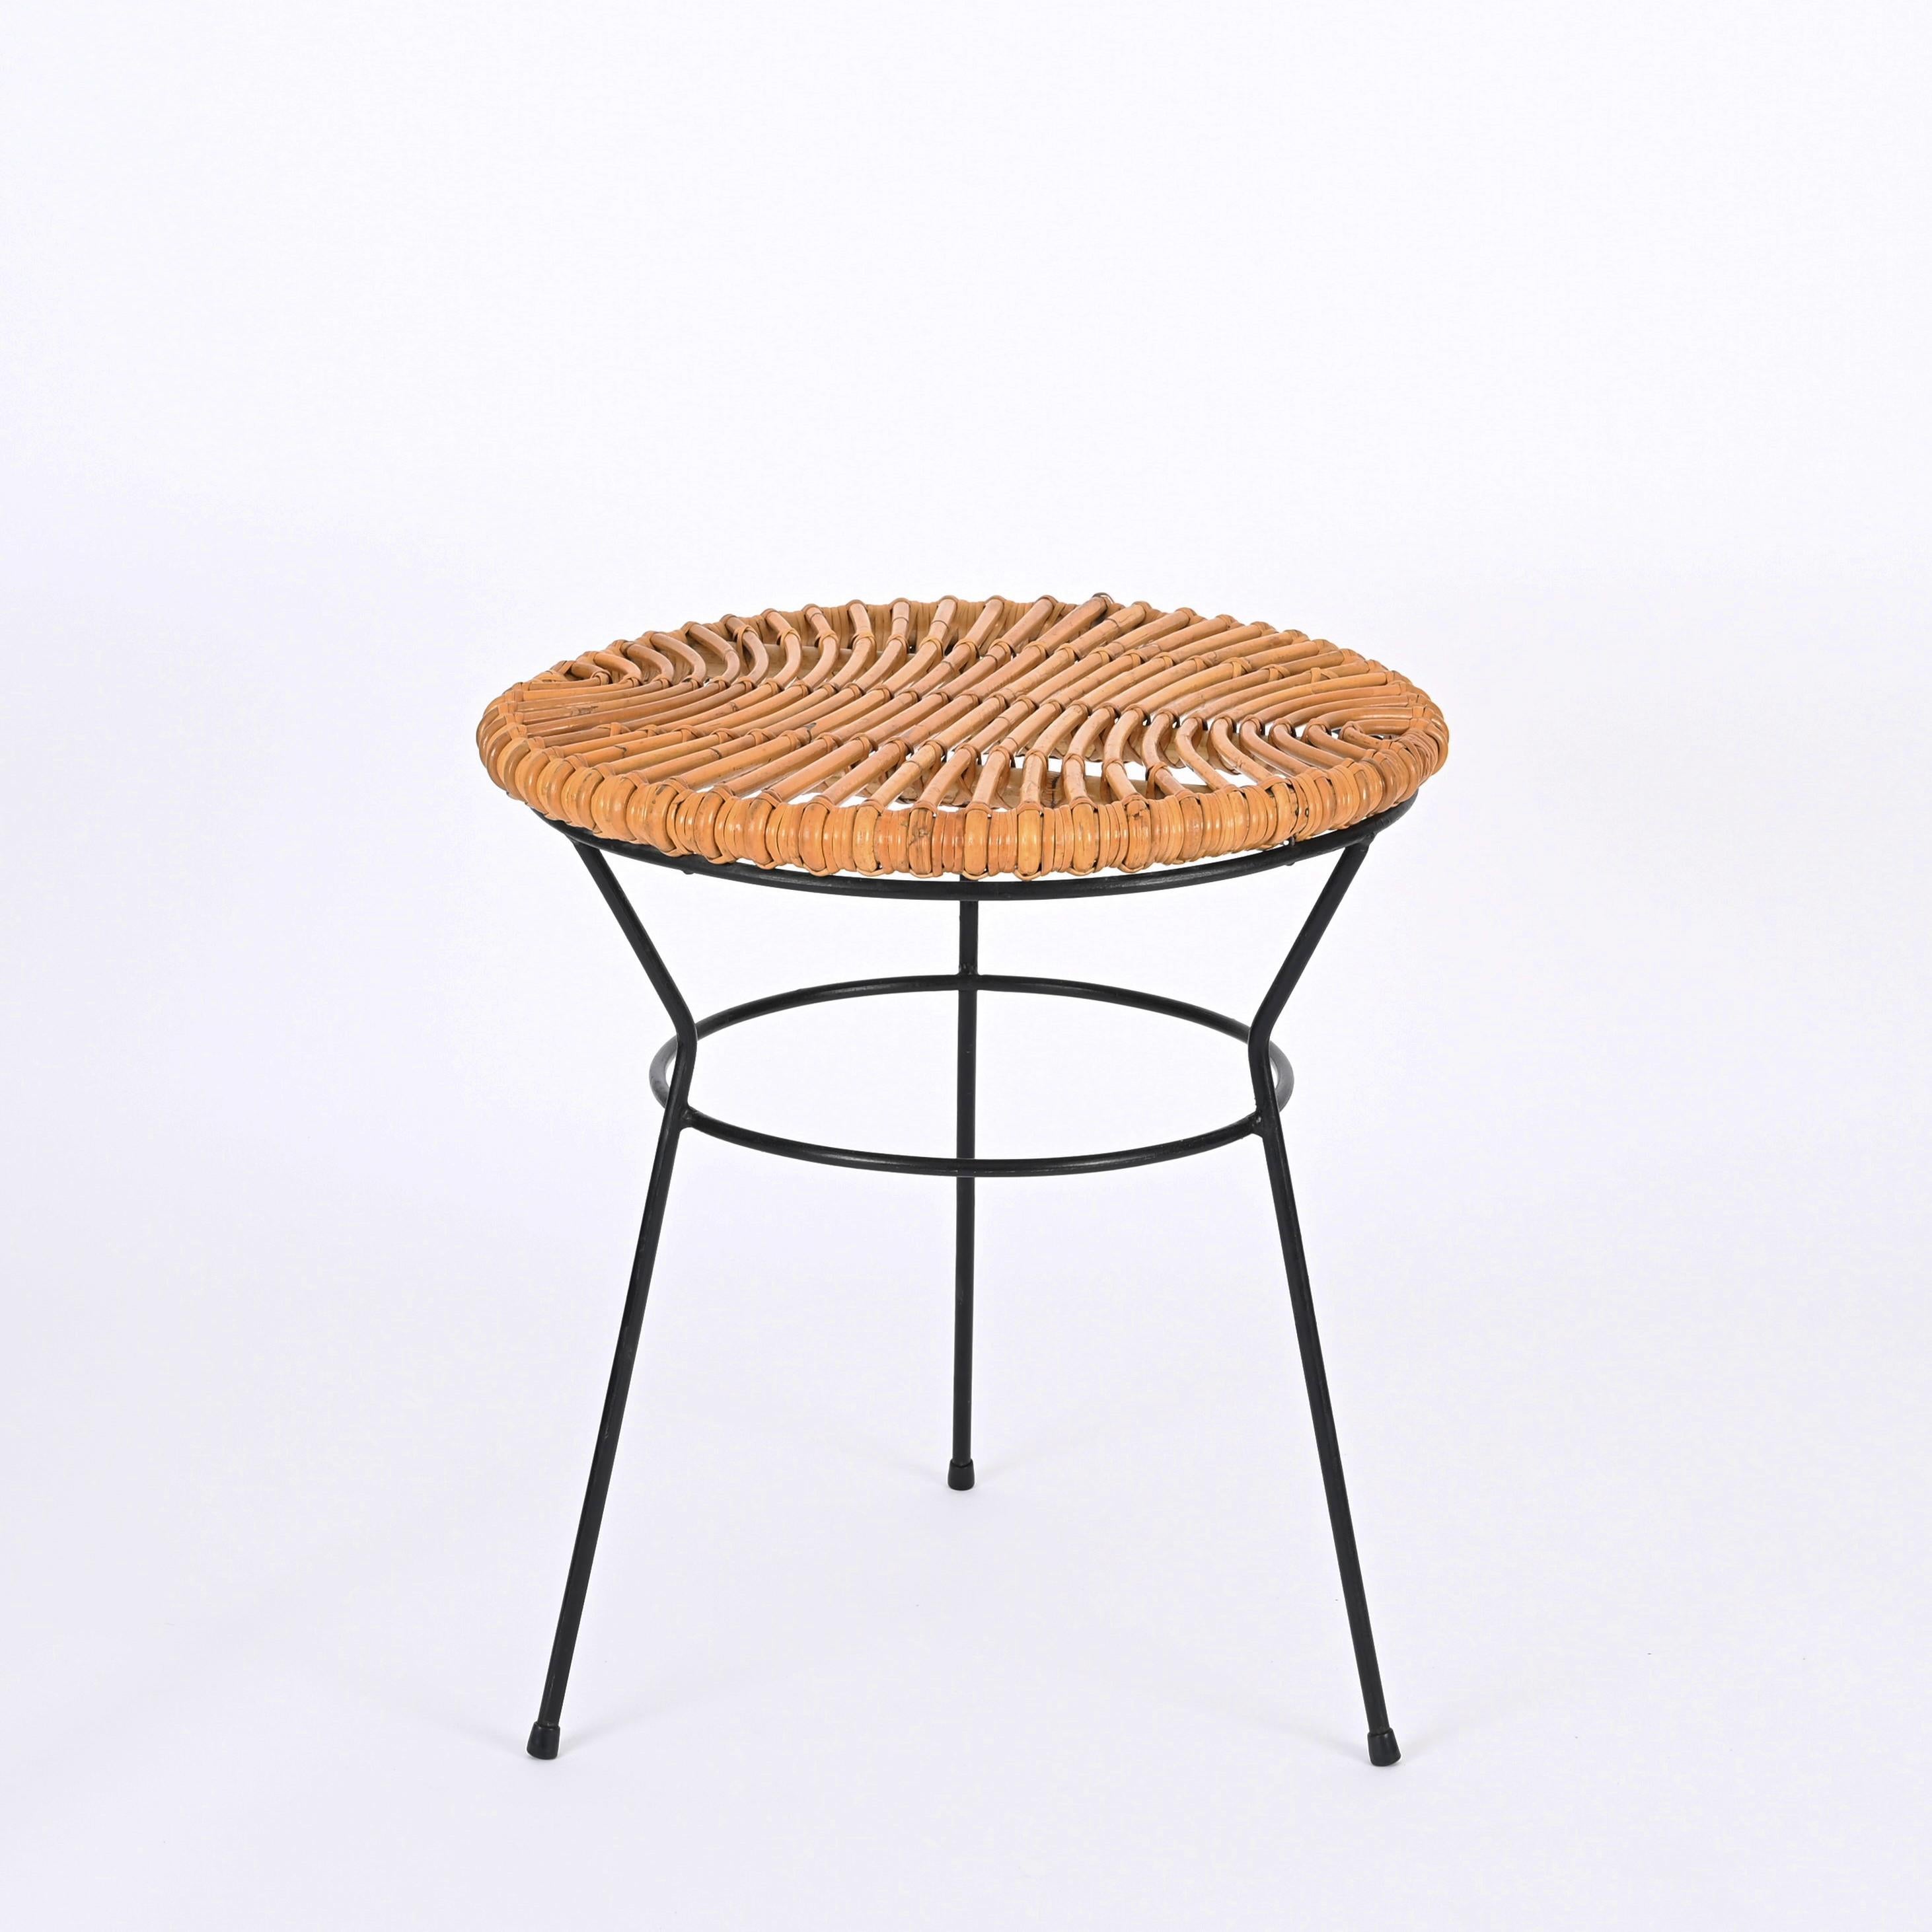 Mid-Century Modern French Riviera Rattan, Wicker and Iron Coffee Table, Roberto Mango, Italy 1960s For Sale